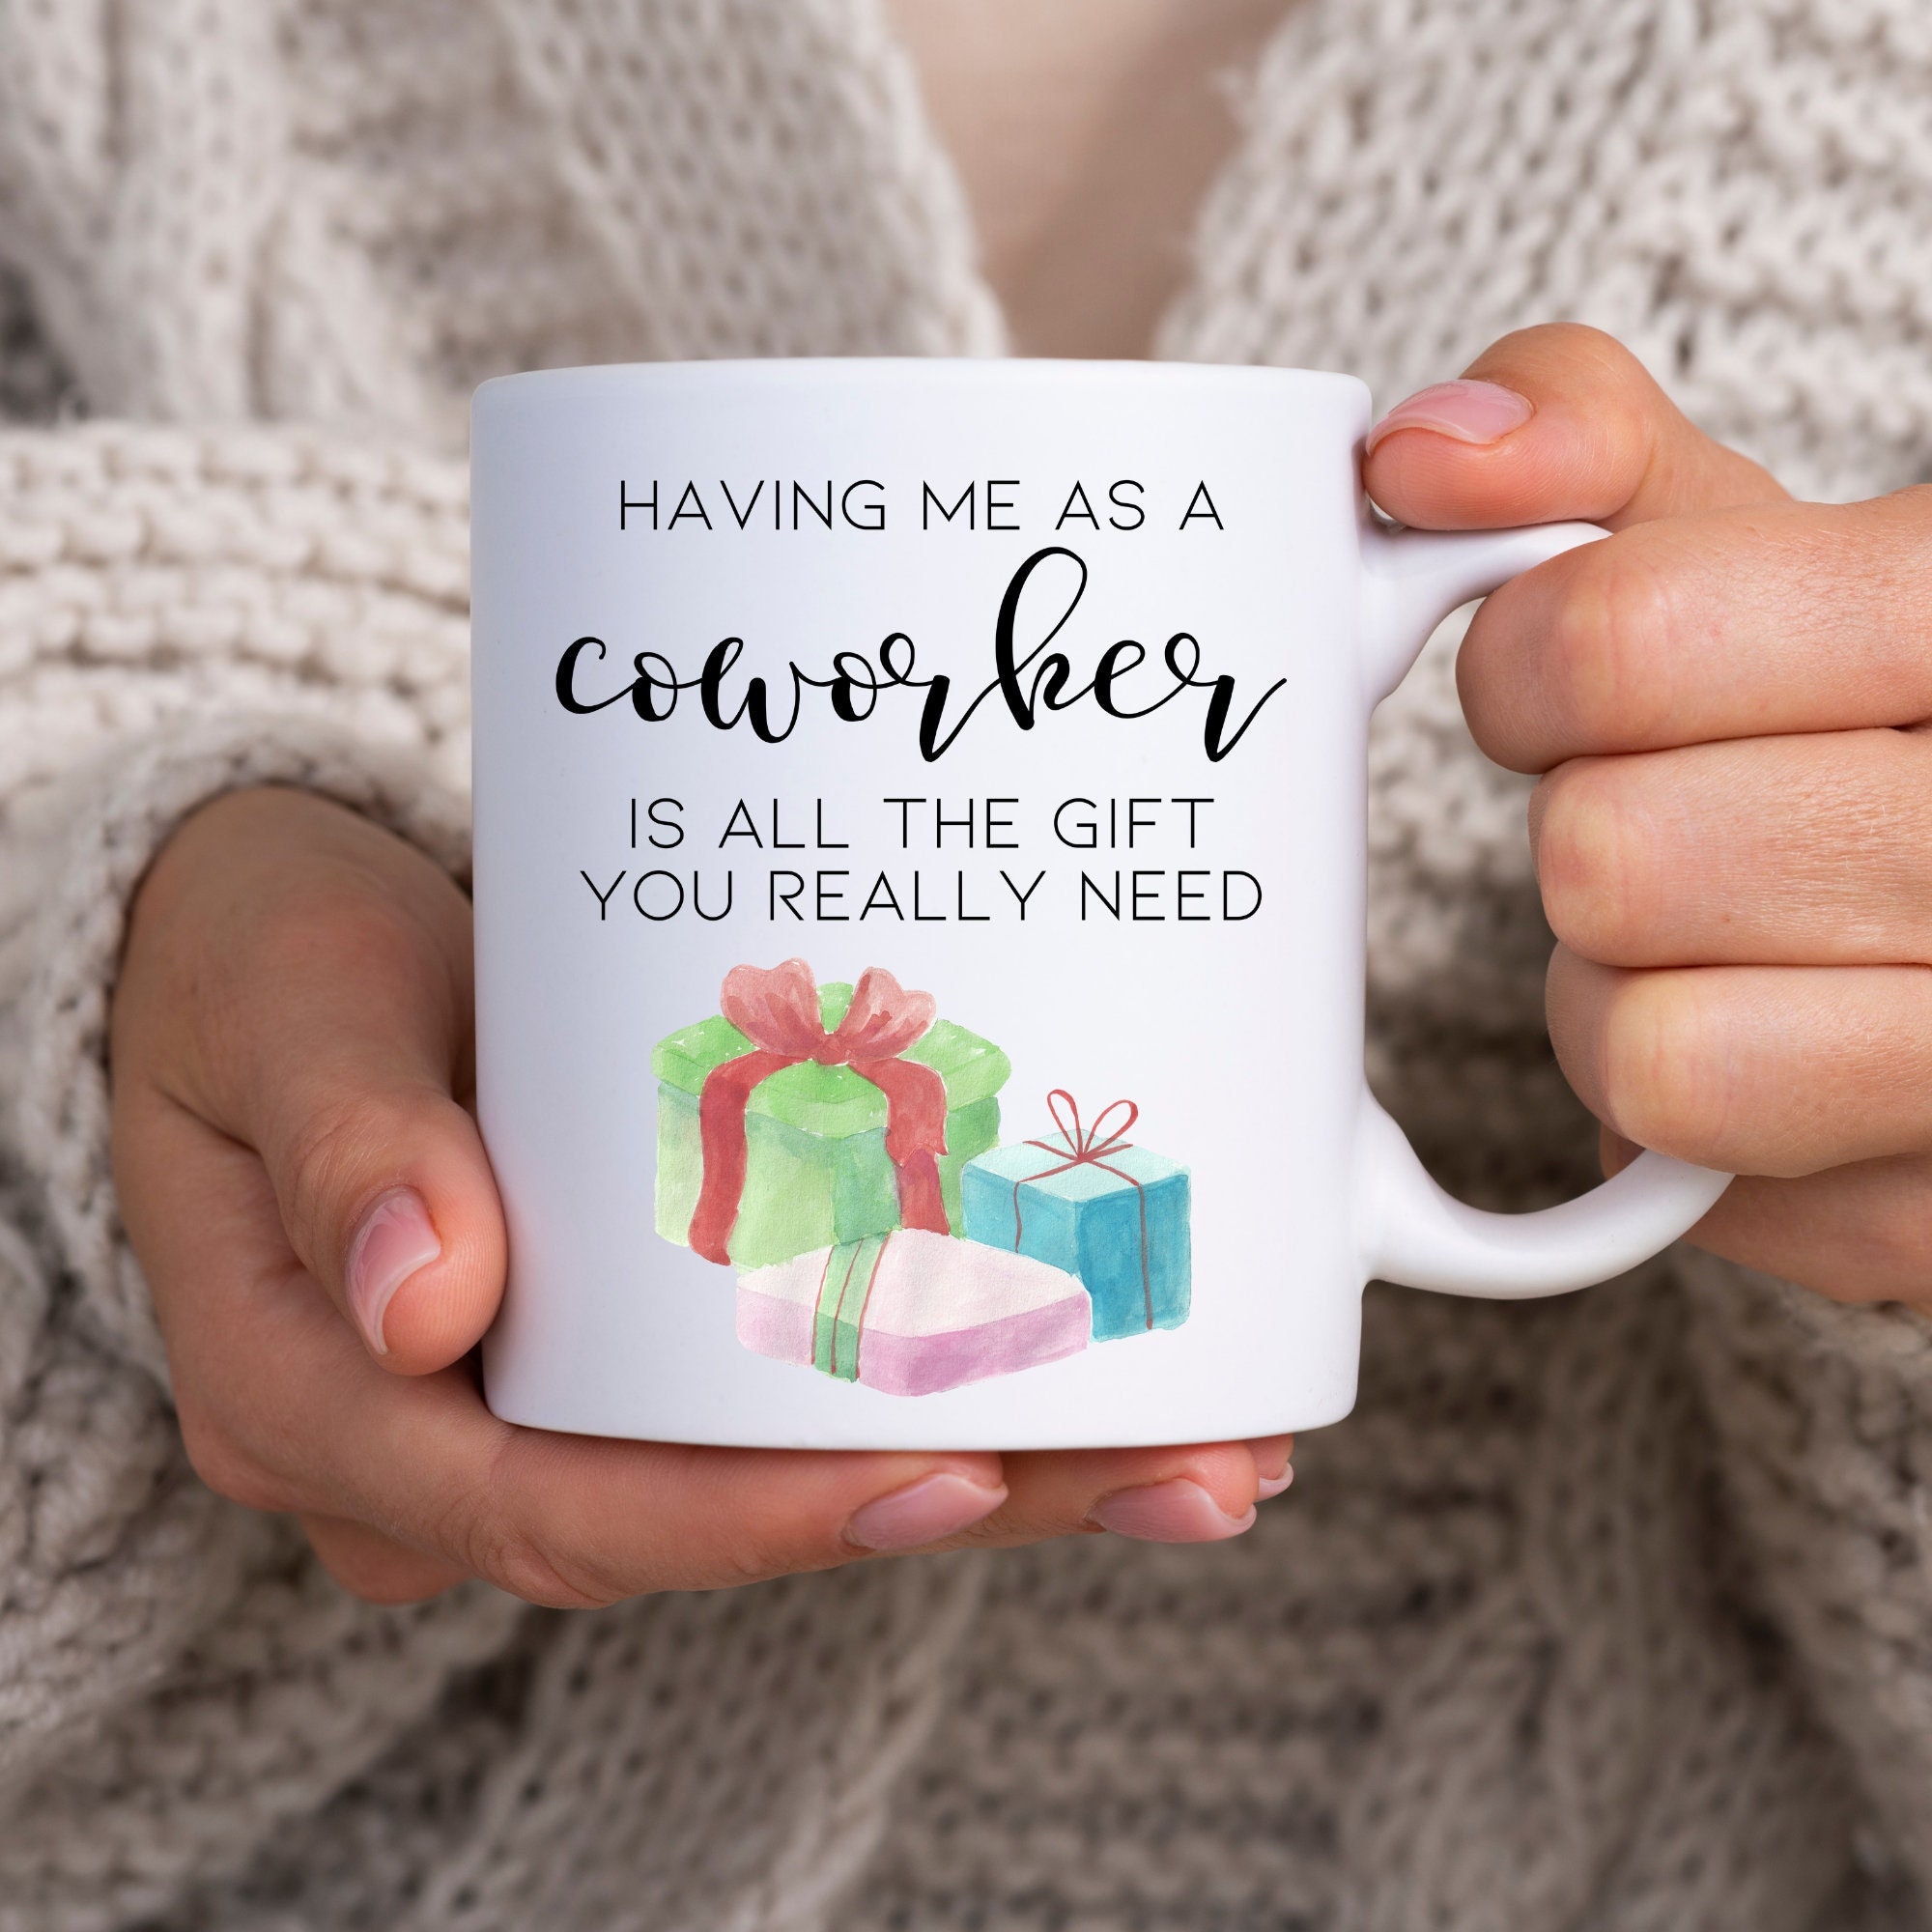 Sarcastic Christmas Candle, Funny Gift for Coworker, Holiday Gift Exch –  Cute But Rude